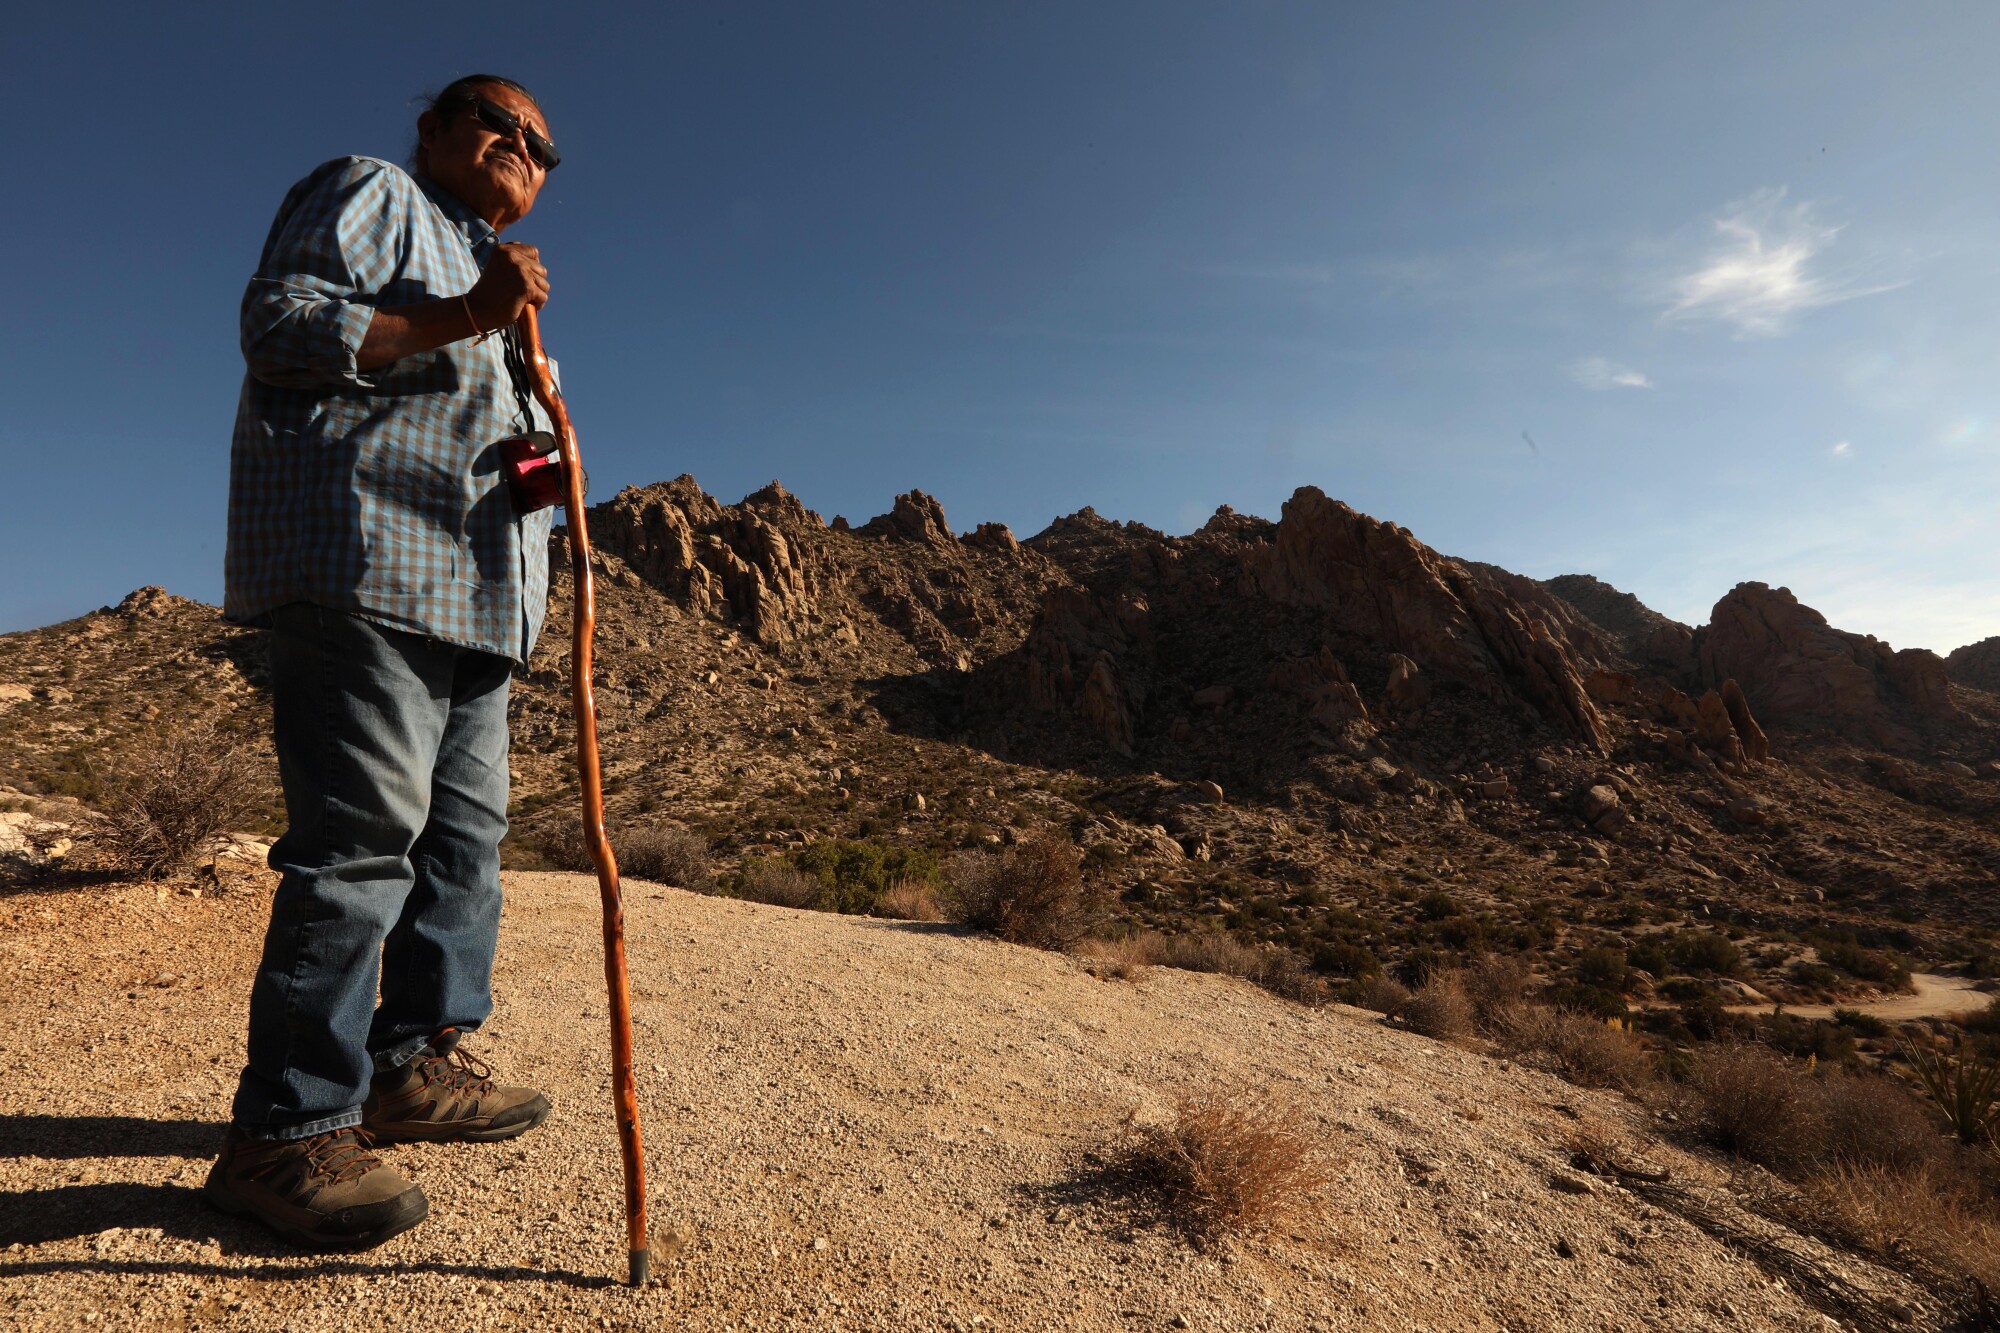 A man leans on a walking stick in the desert.